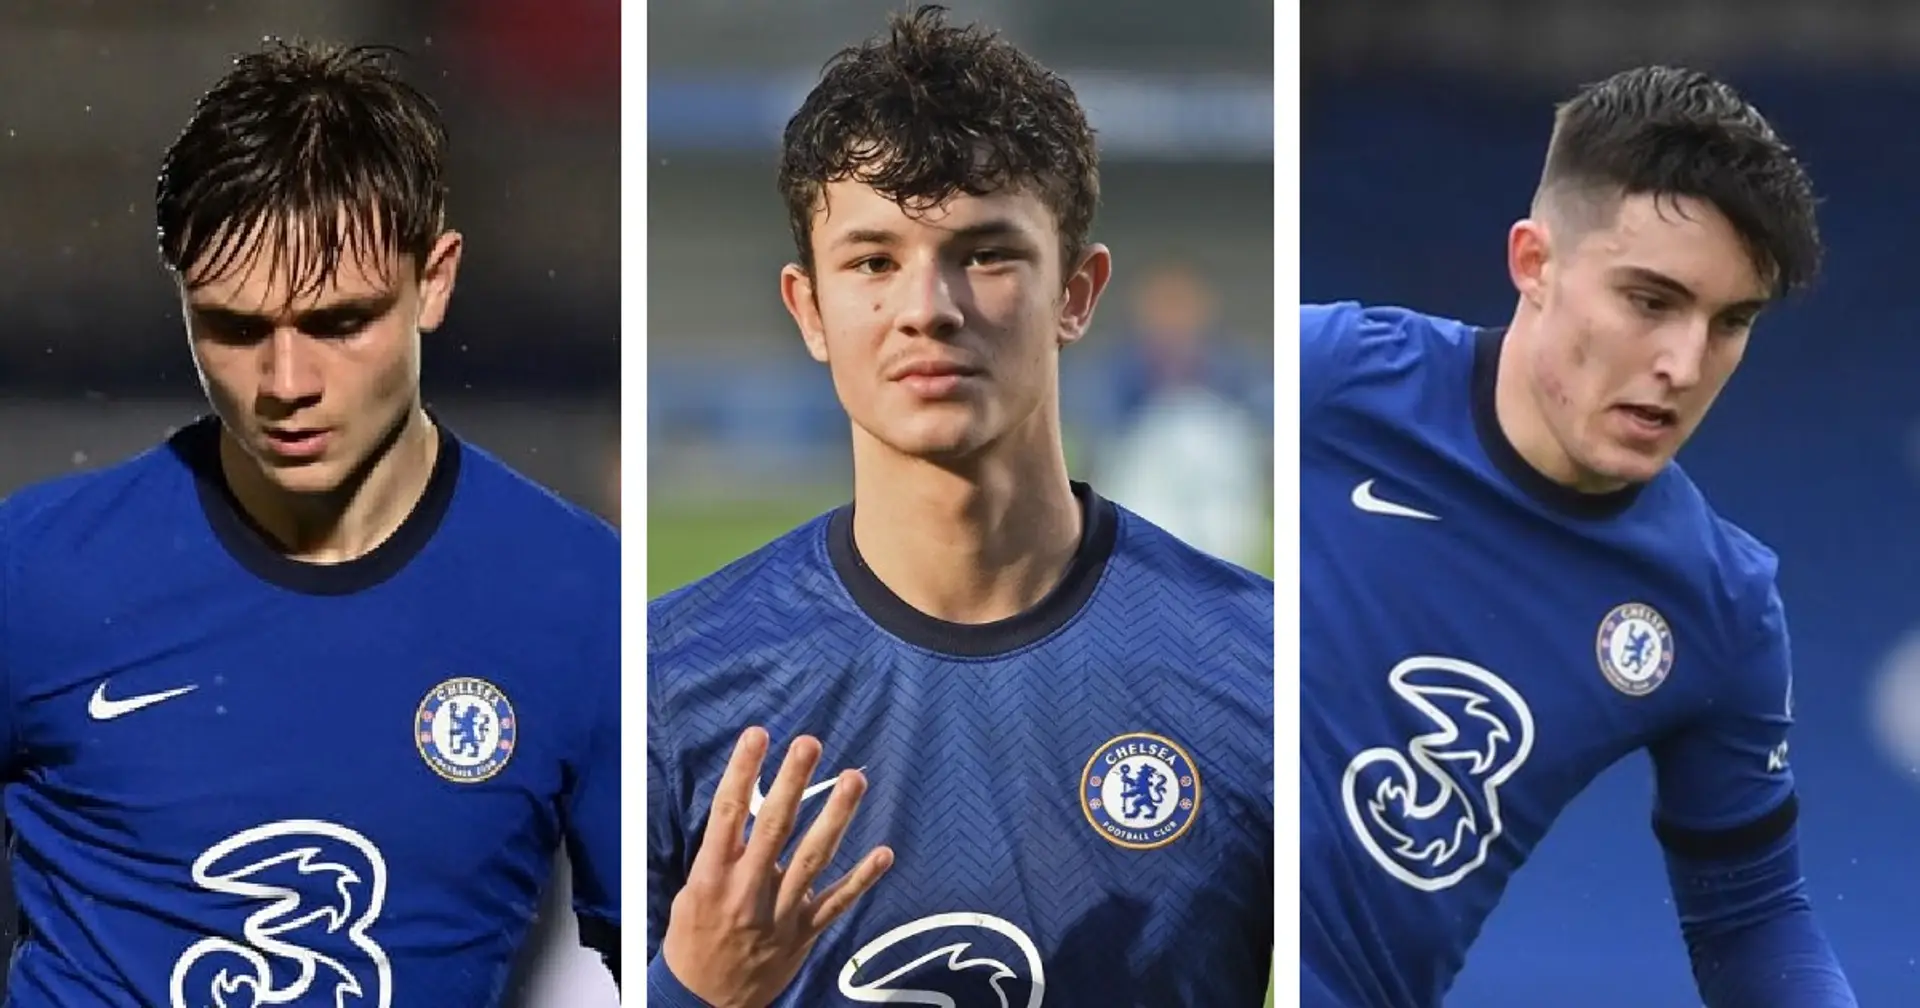 Who are Bate, Livramento, and Soonsup-Bell? A closer look at Chelsea youngsters set for FA Cup action